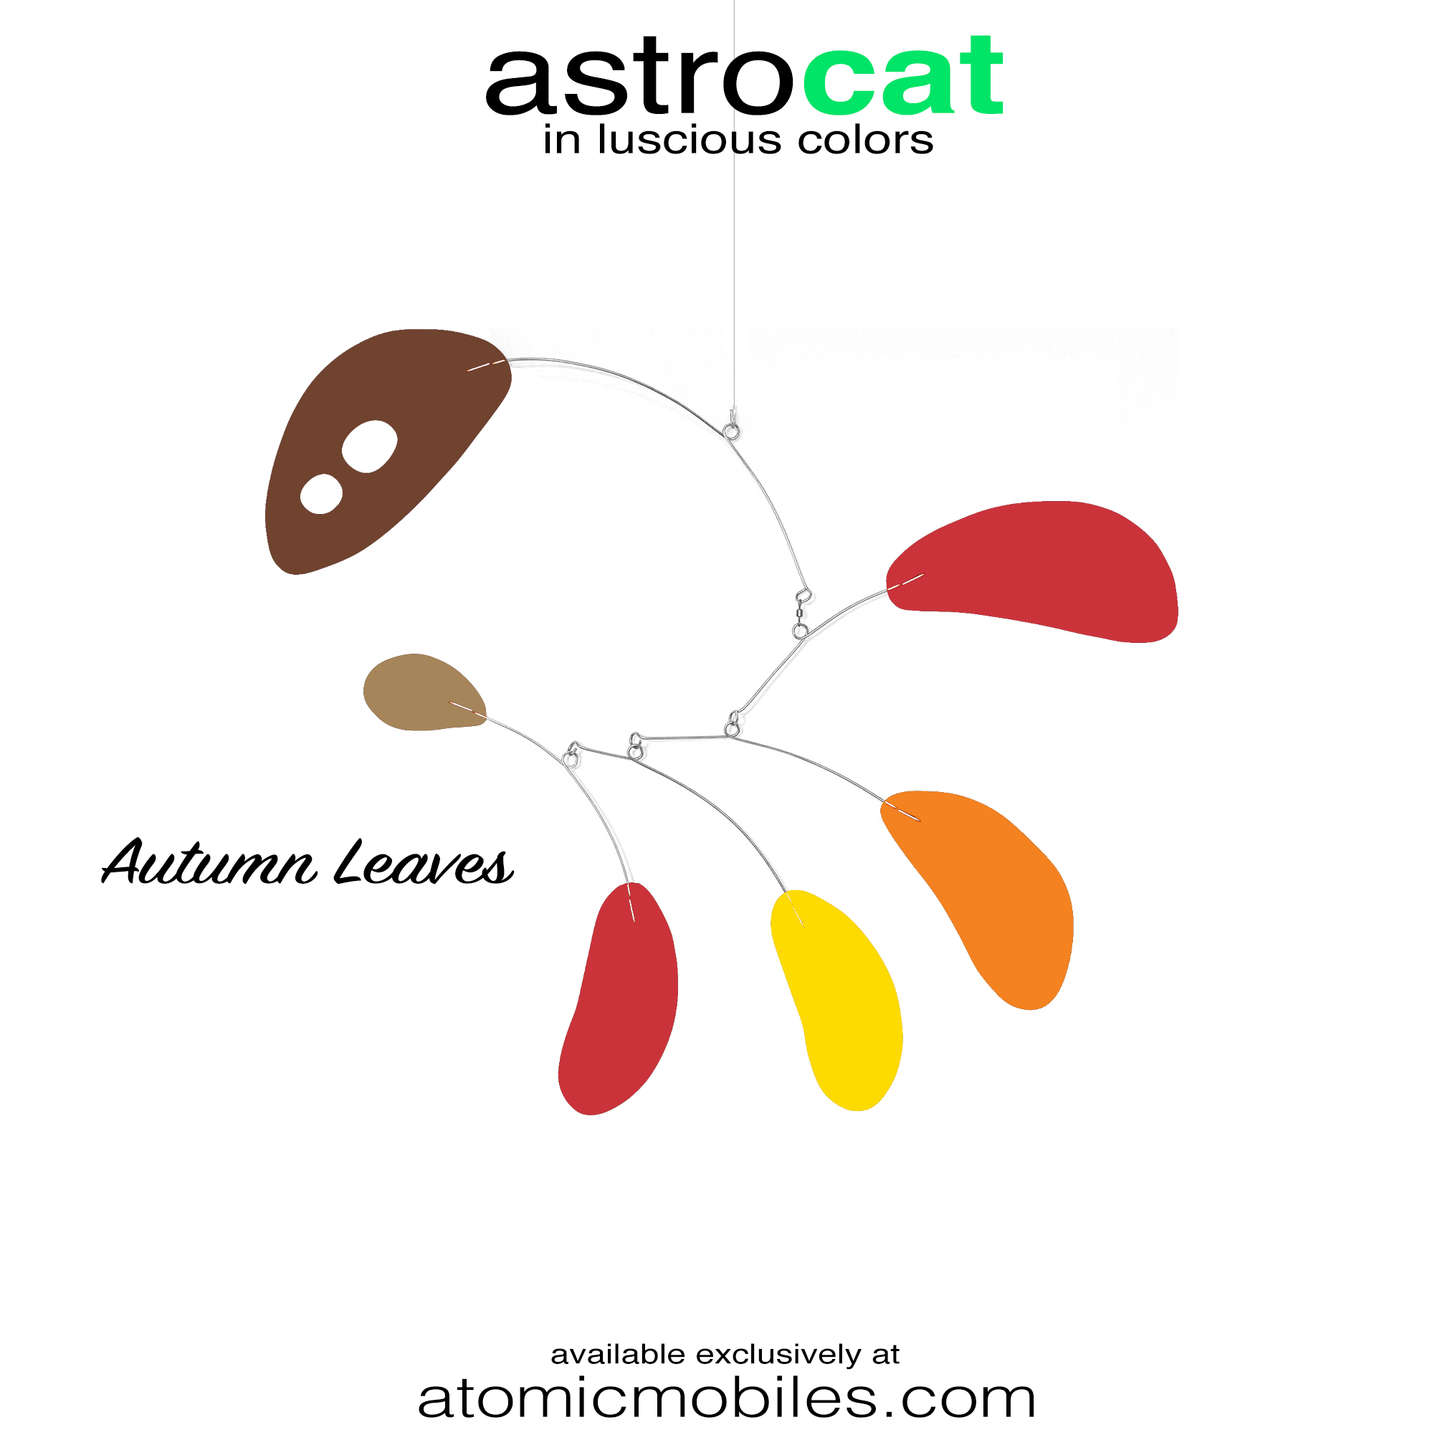 GROOVECATS AstroCat style kinetic hanging art mobile in Fall Colors of brown, red, orange, yellow, and latte by AtomicMobiles.com